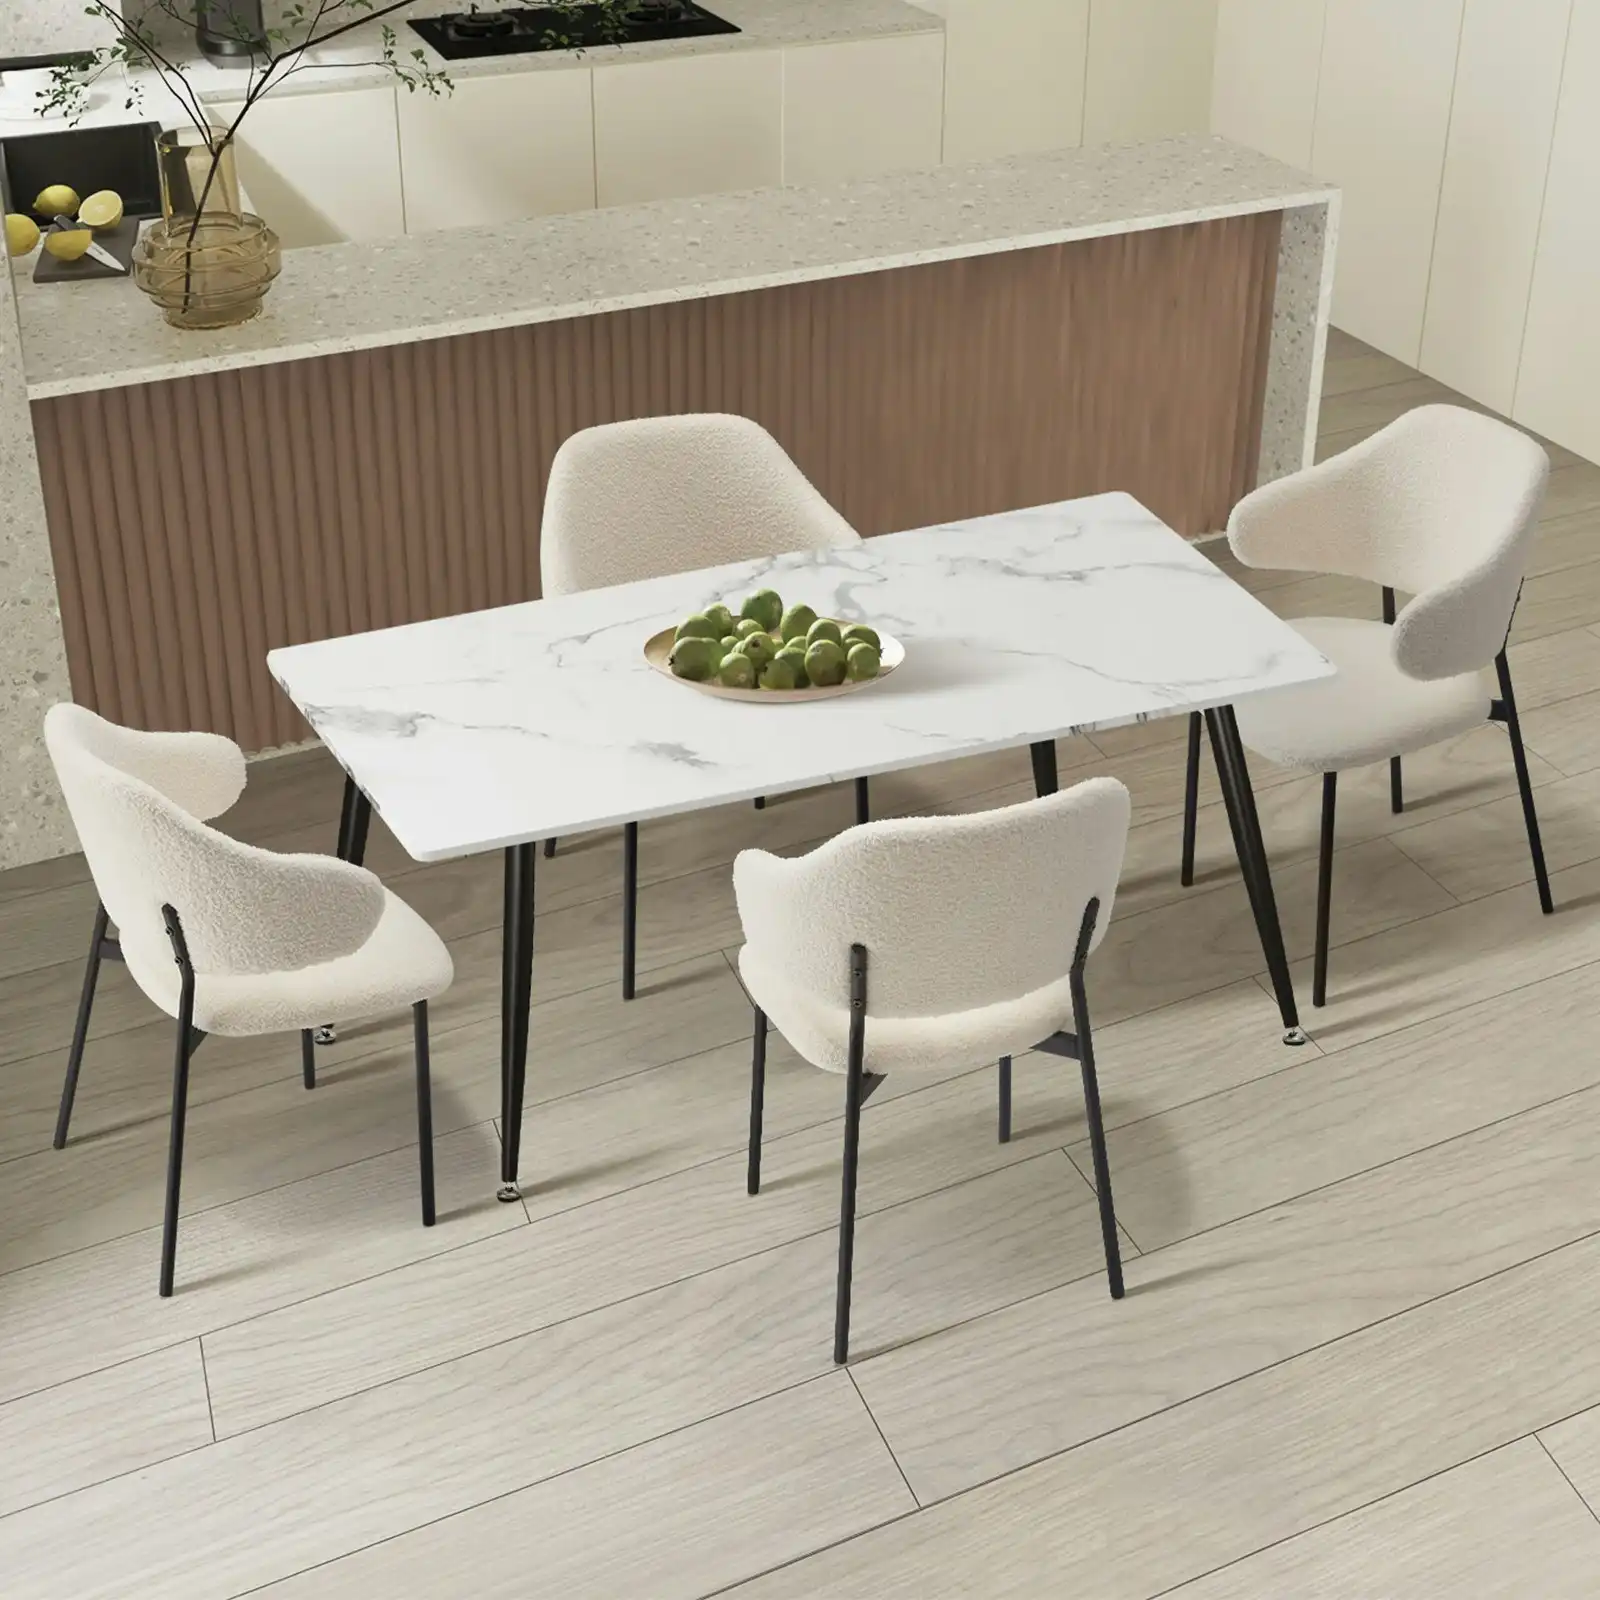 Oikiture 5PCS Dining sets 120cm Rectangle Table with Chairs Sherpa-White